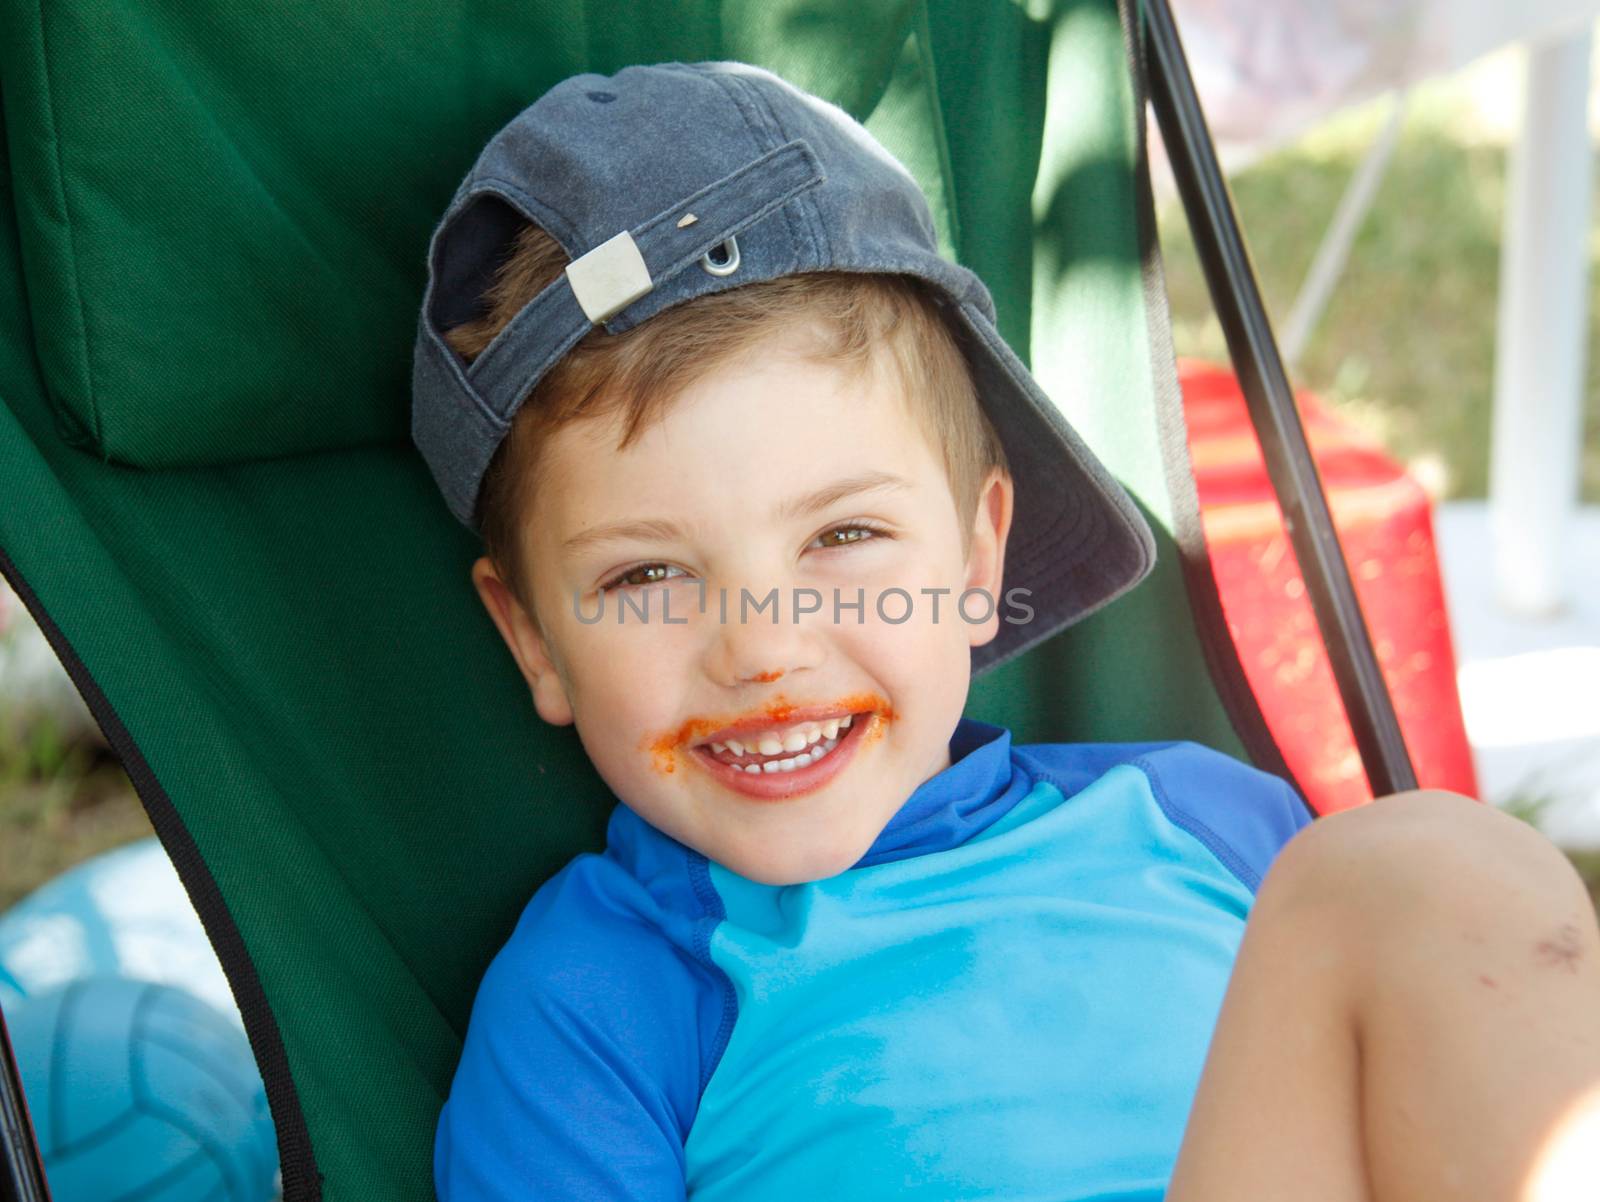 Portrait of a smiling little boy with red sauce around his mouth.